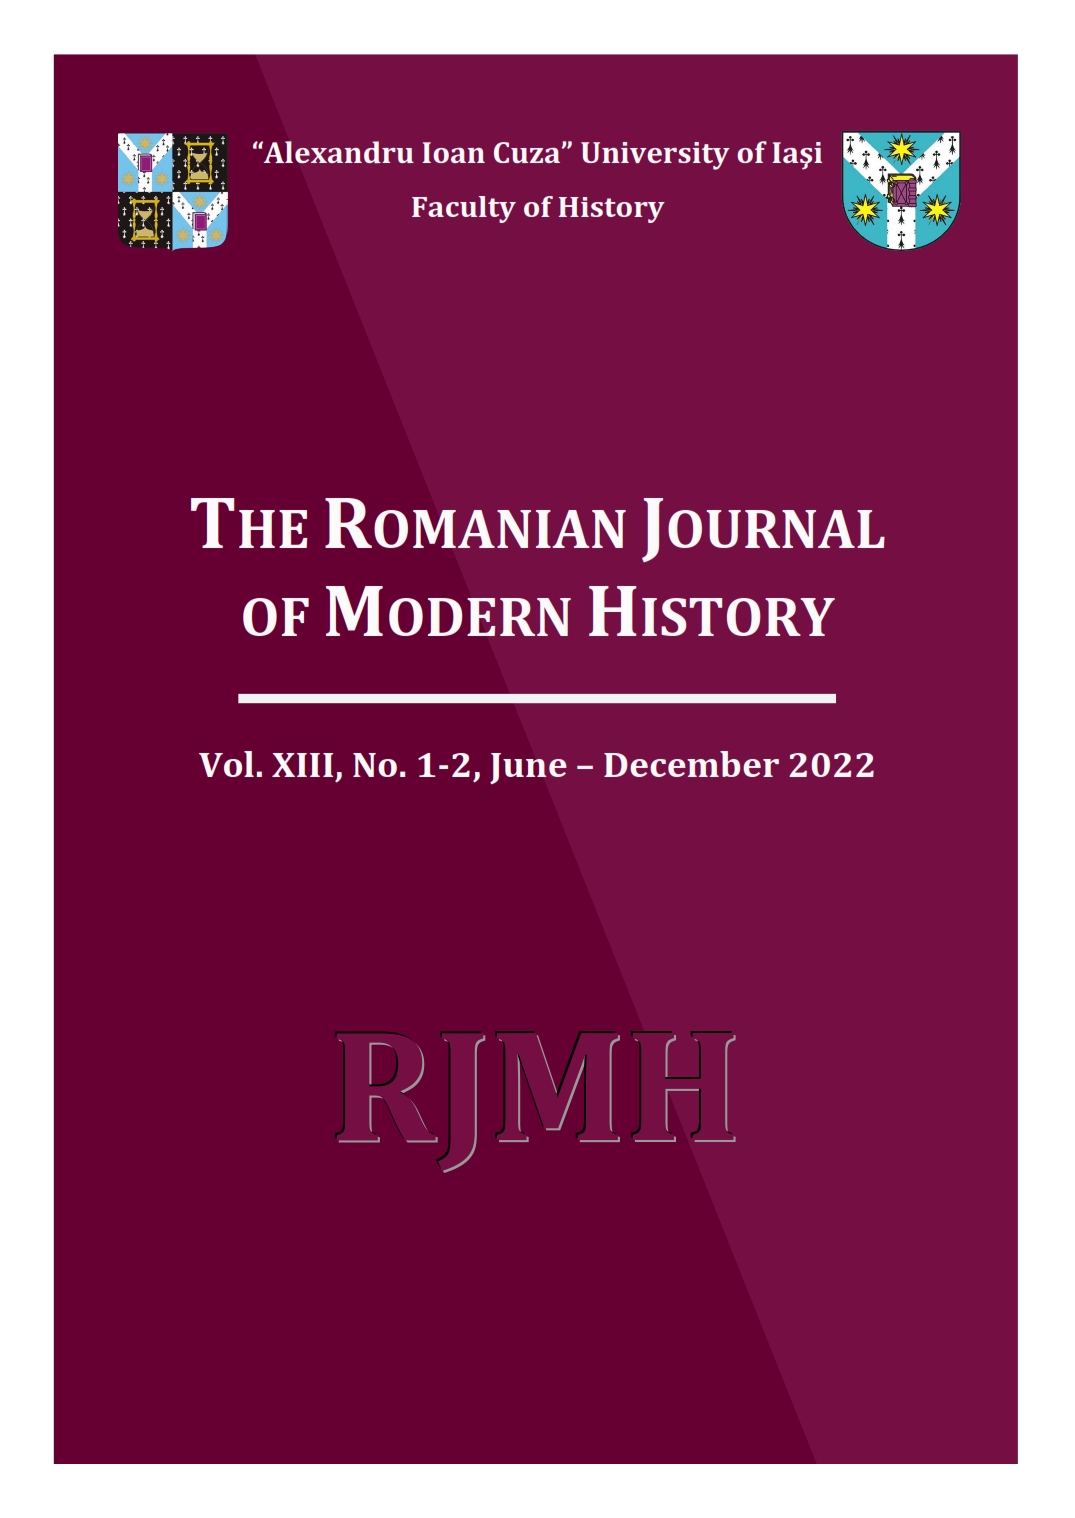 Romanian dynastic honours in today’s Republic: a historical perspective